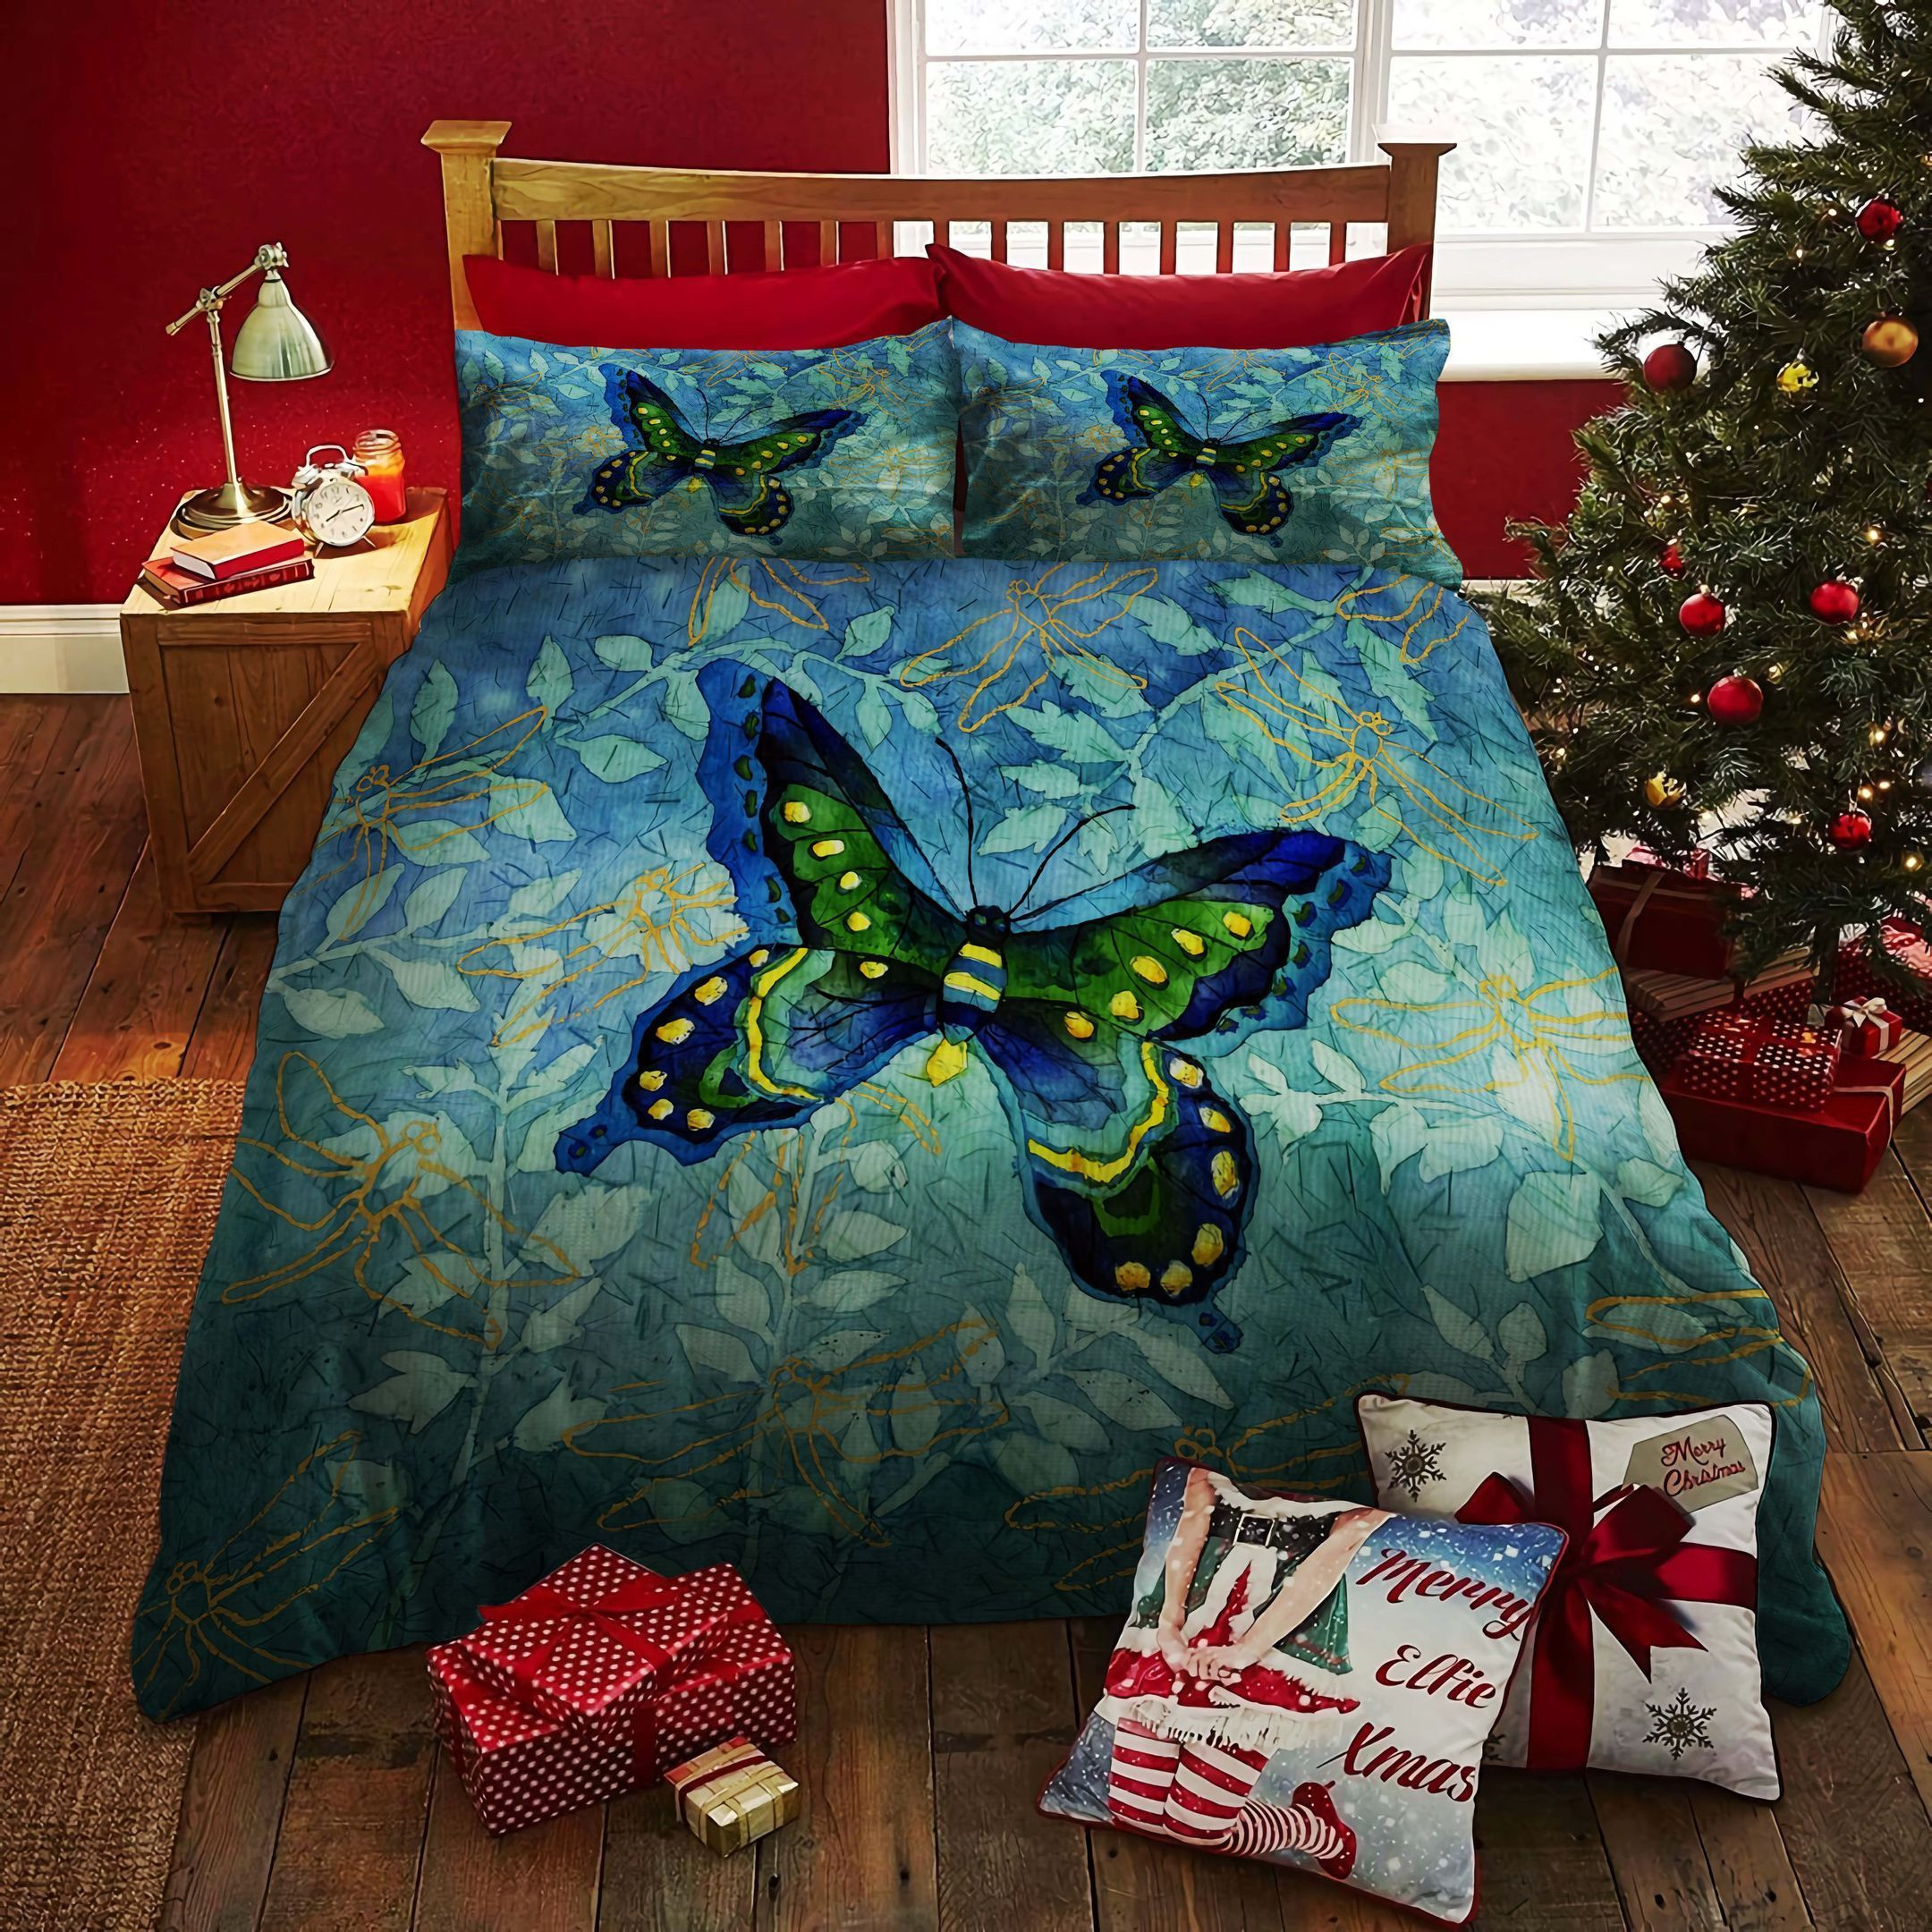 blue butterfly bed sheets duvet cover bedding set perfect presents for birthday christmas thanksgiving ugrvy